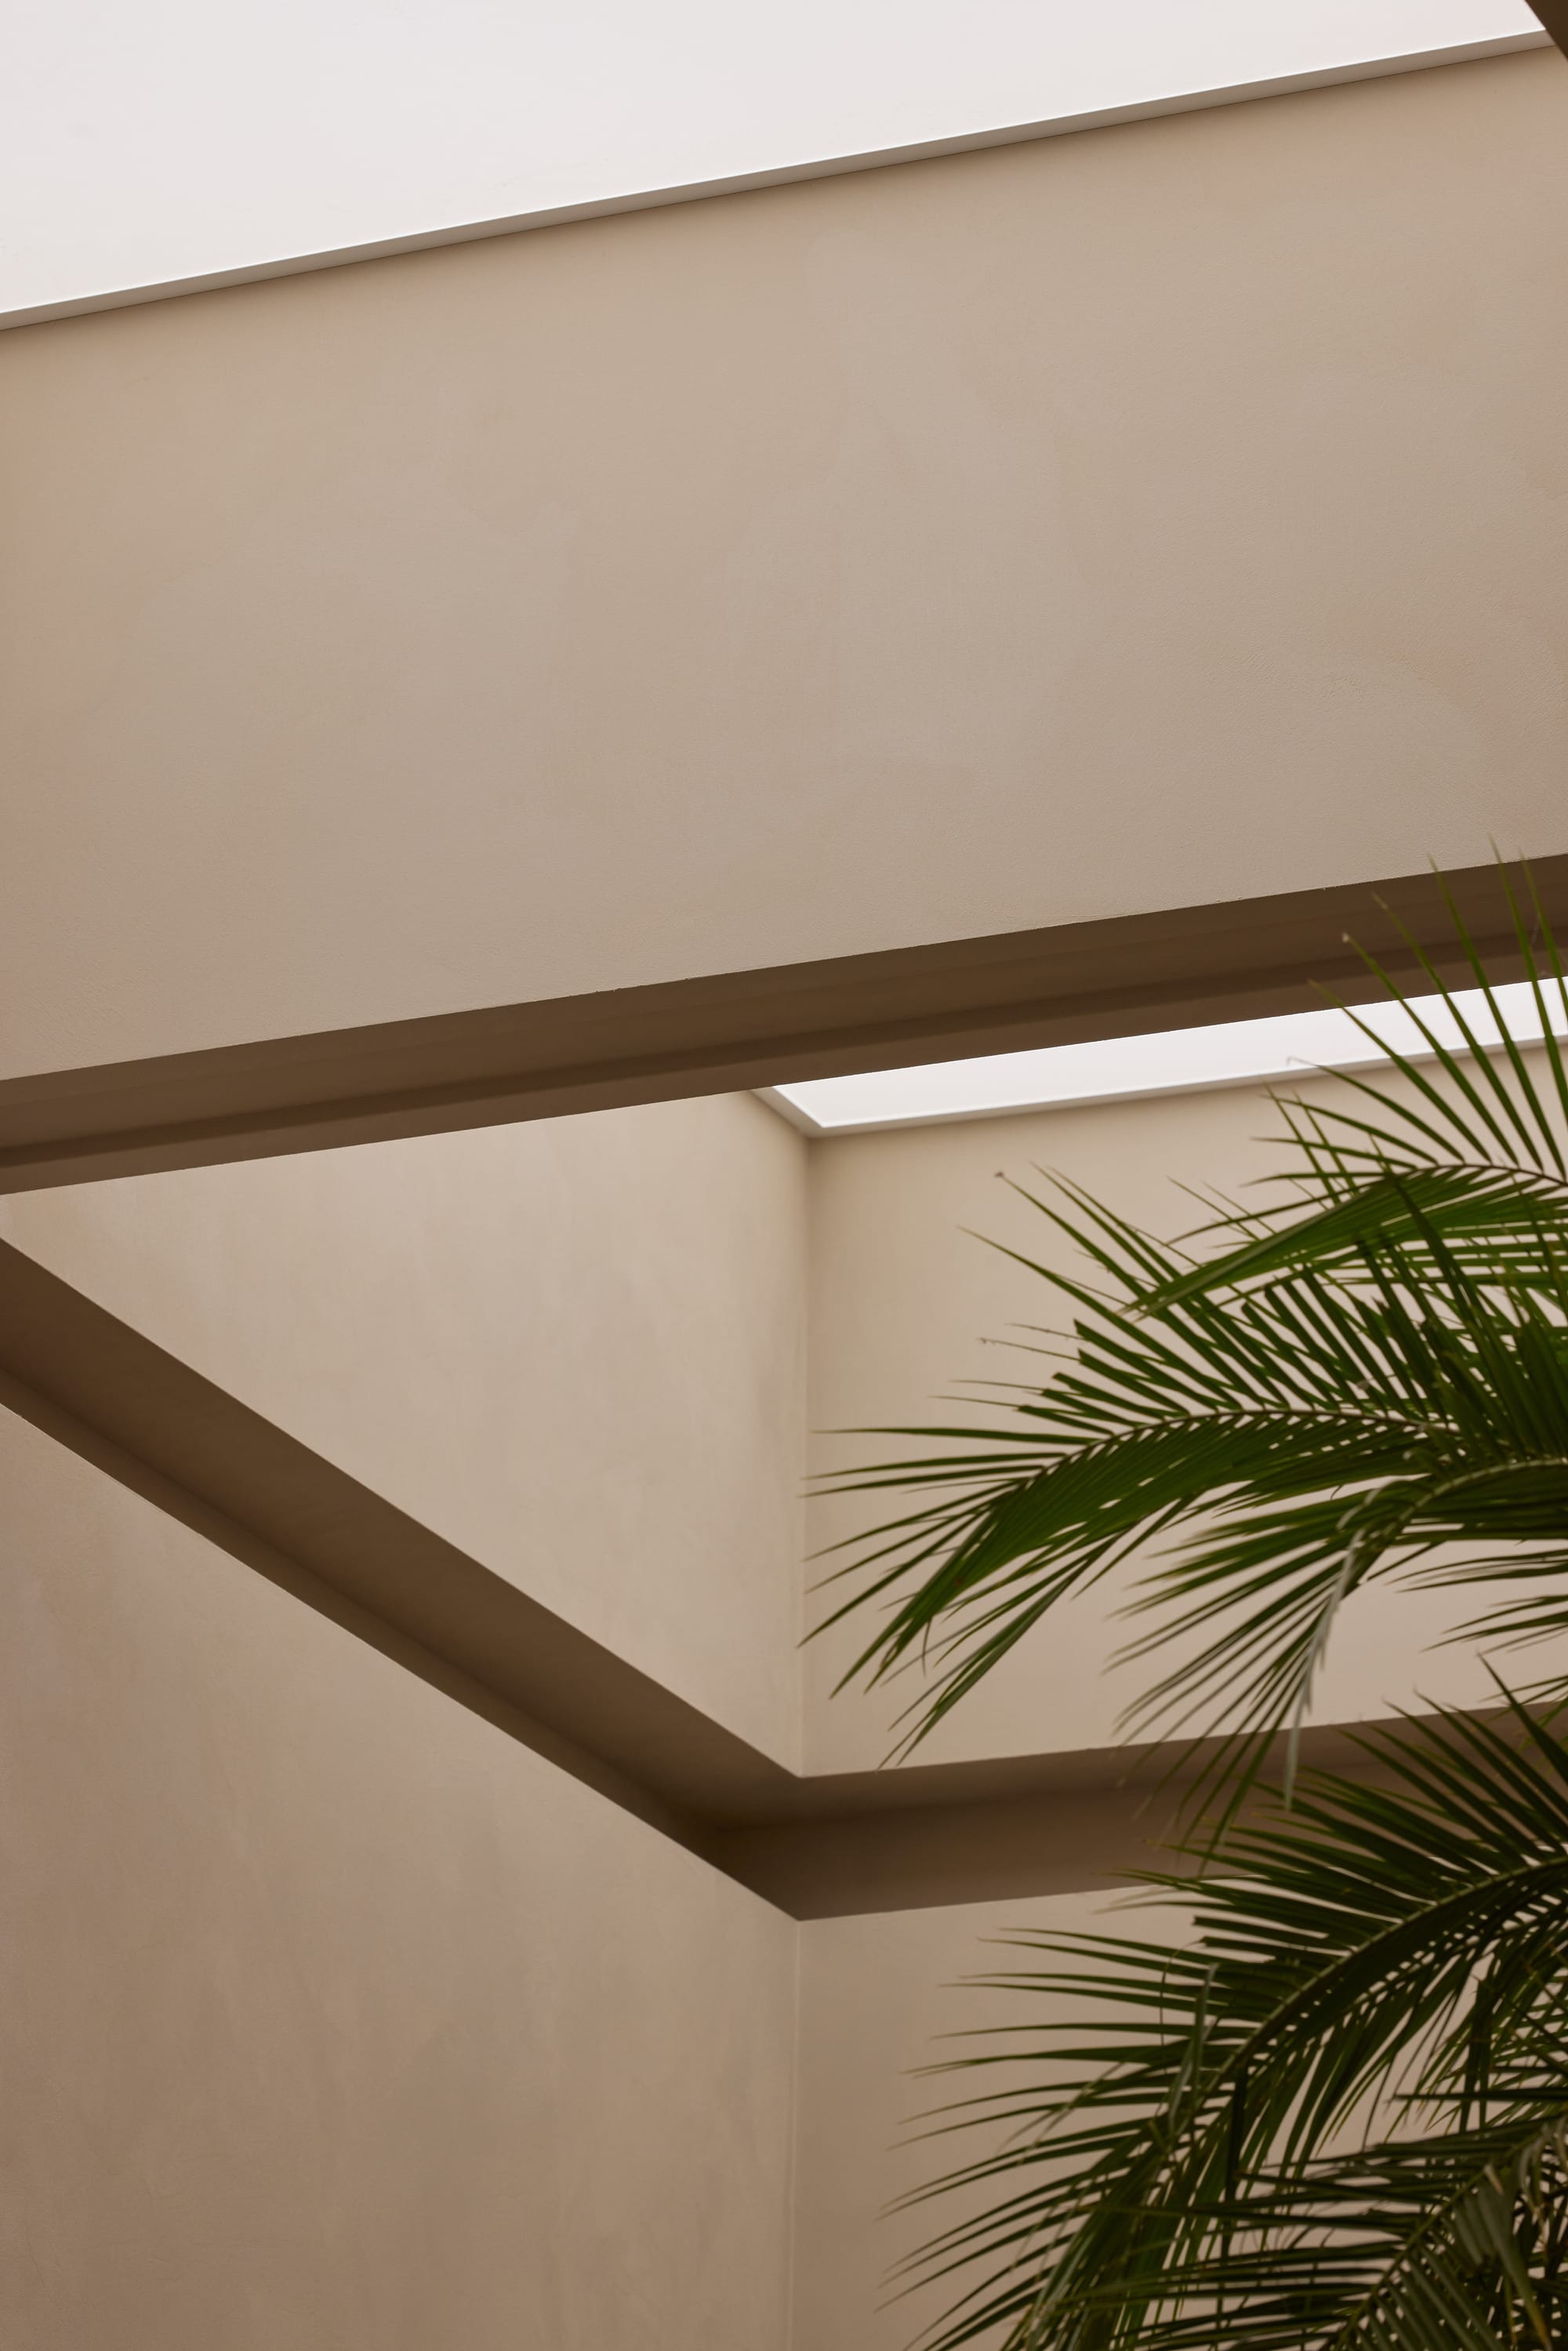 Detail shot of the skylight above the planter and showing a glimpse of the landscape